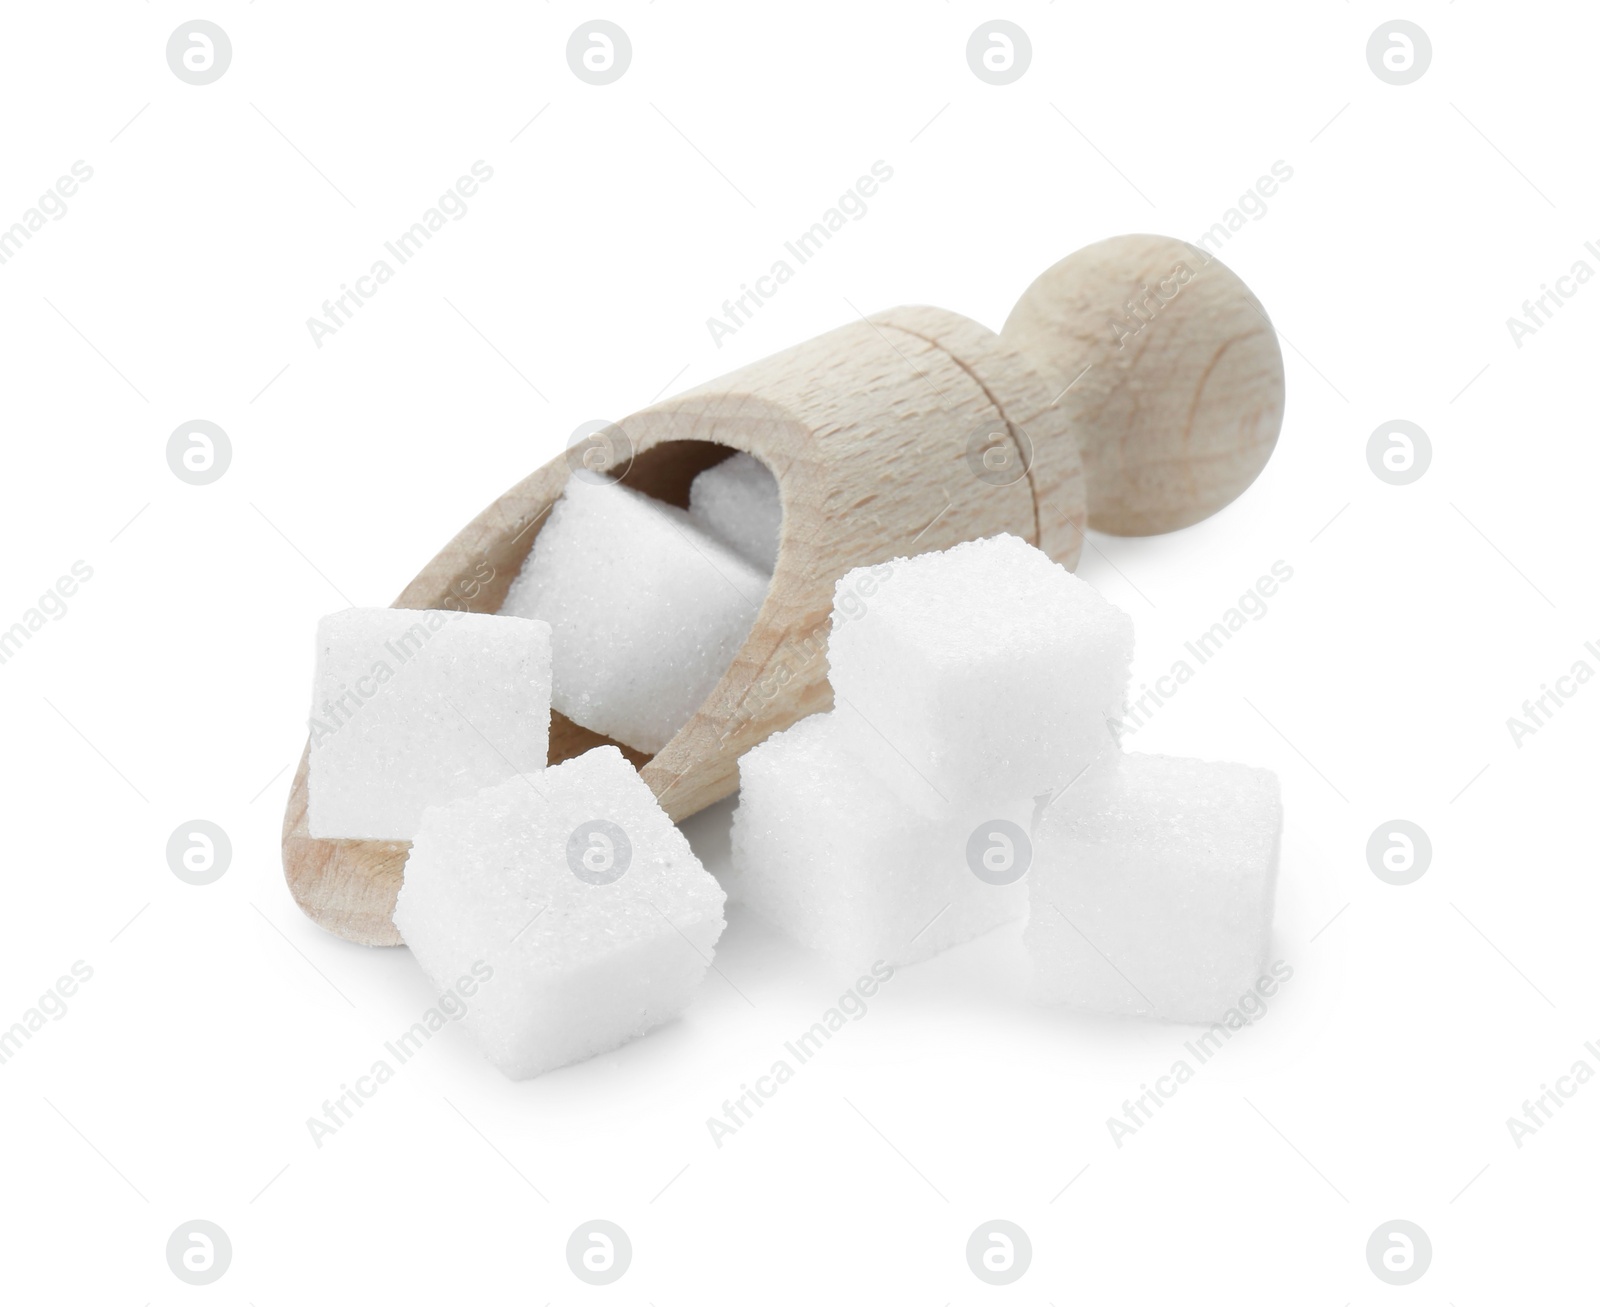 Photo of Sugar cubes and wooden scoop isolated on white